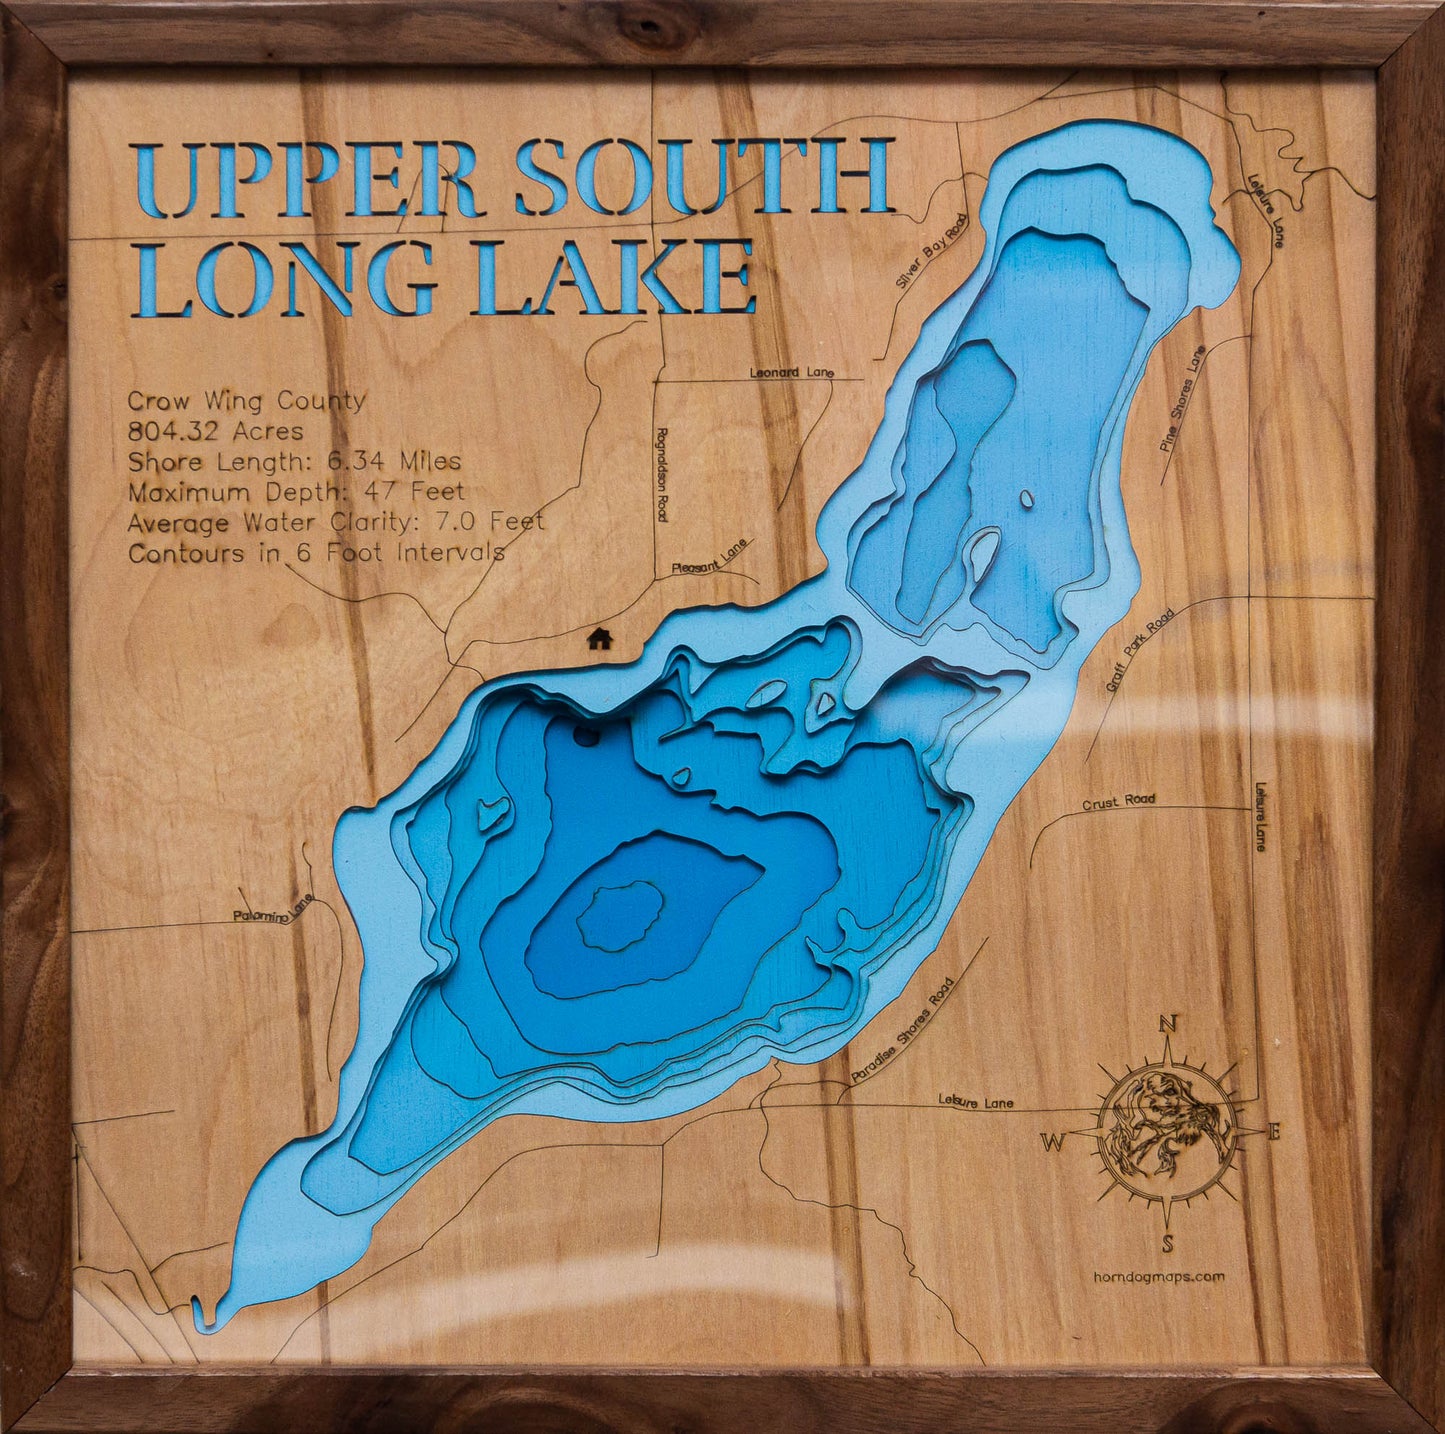 Upper South Long Lake  in Crow Wing County, MN